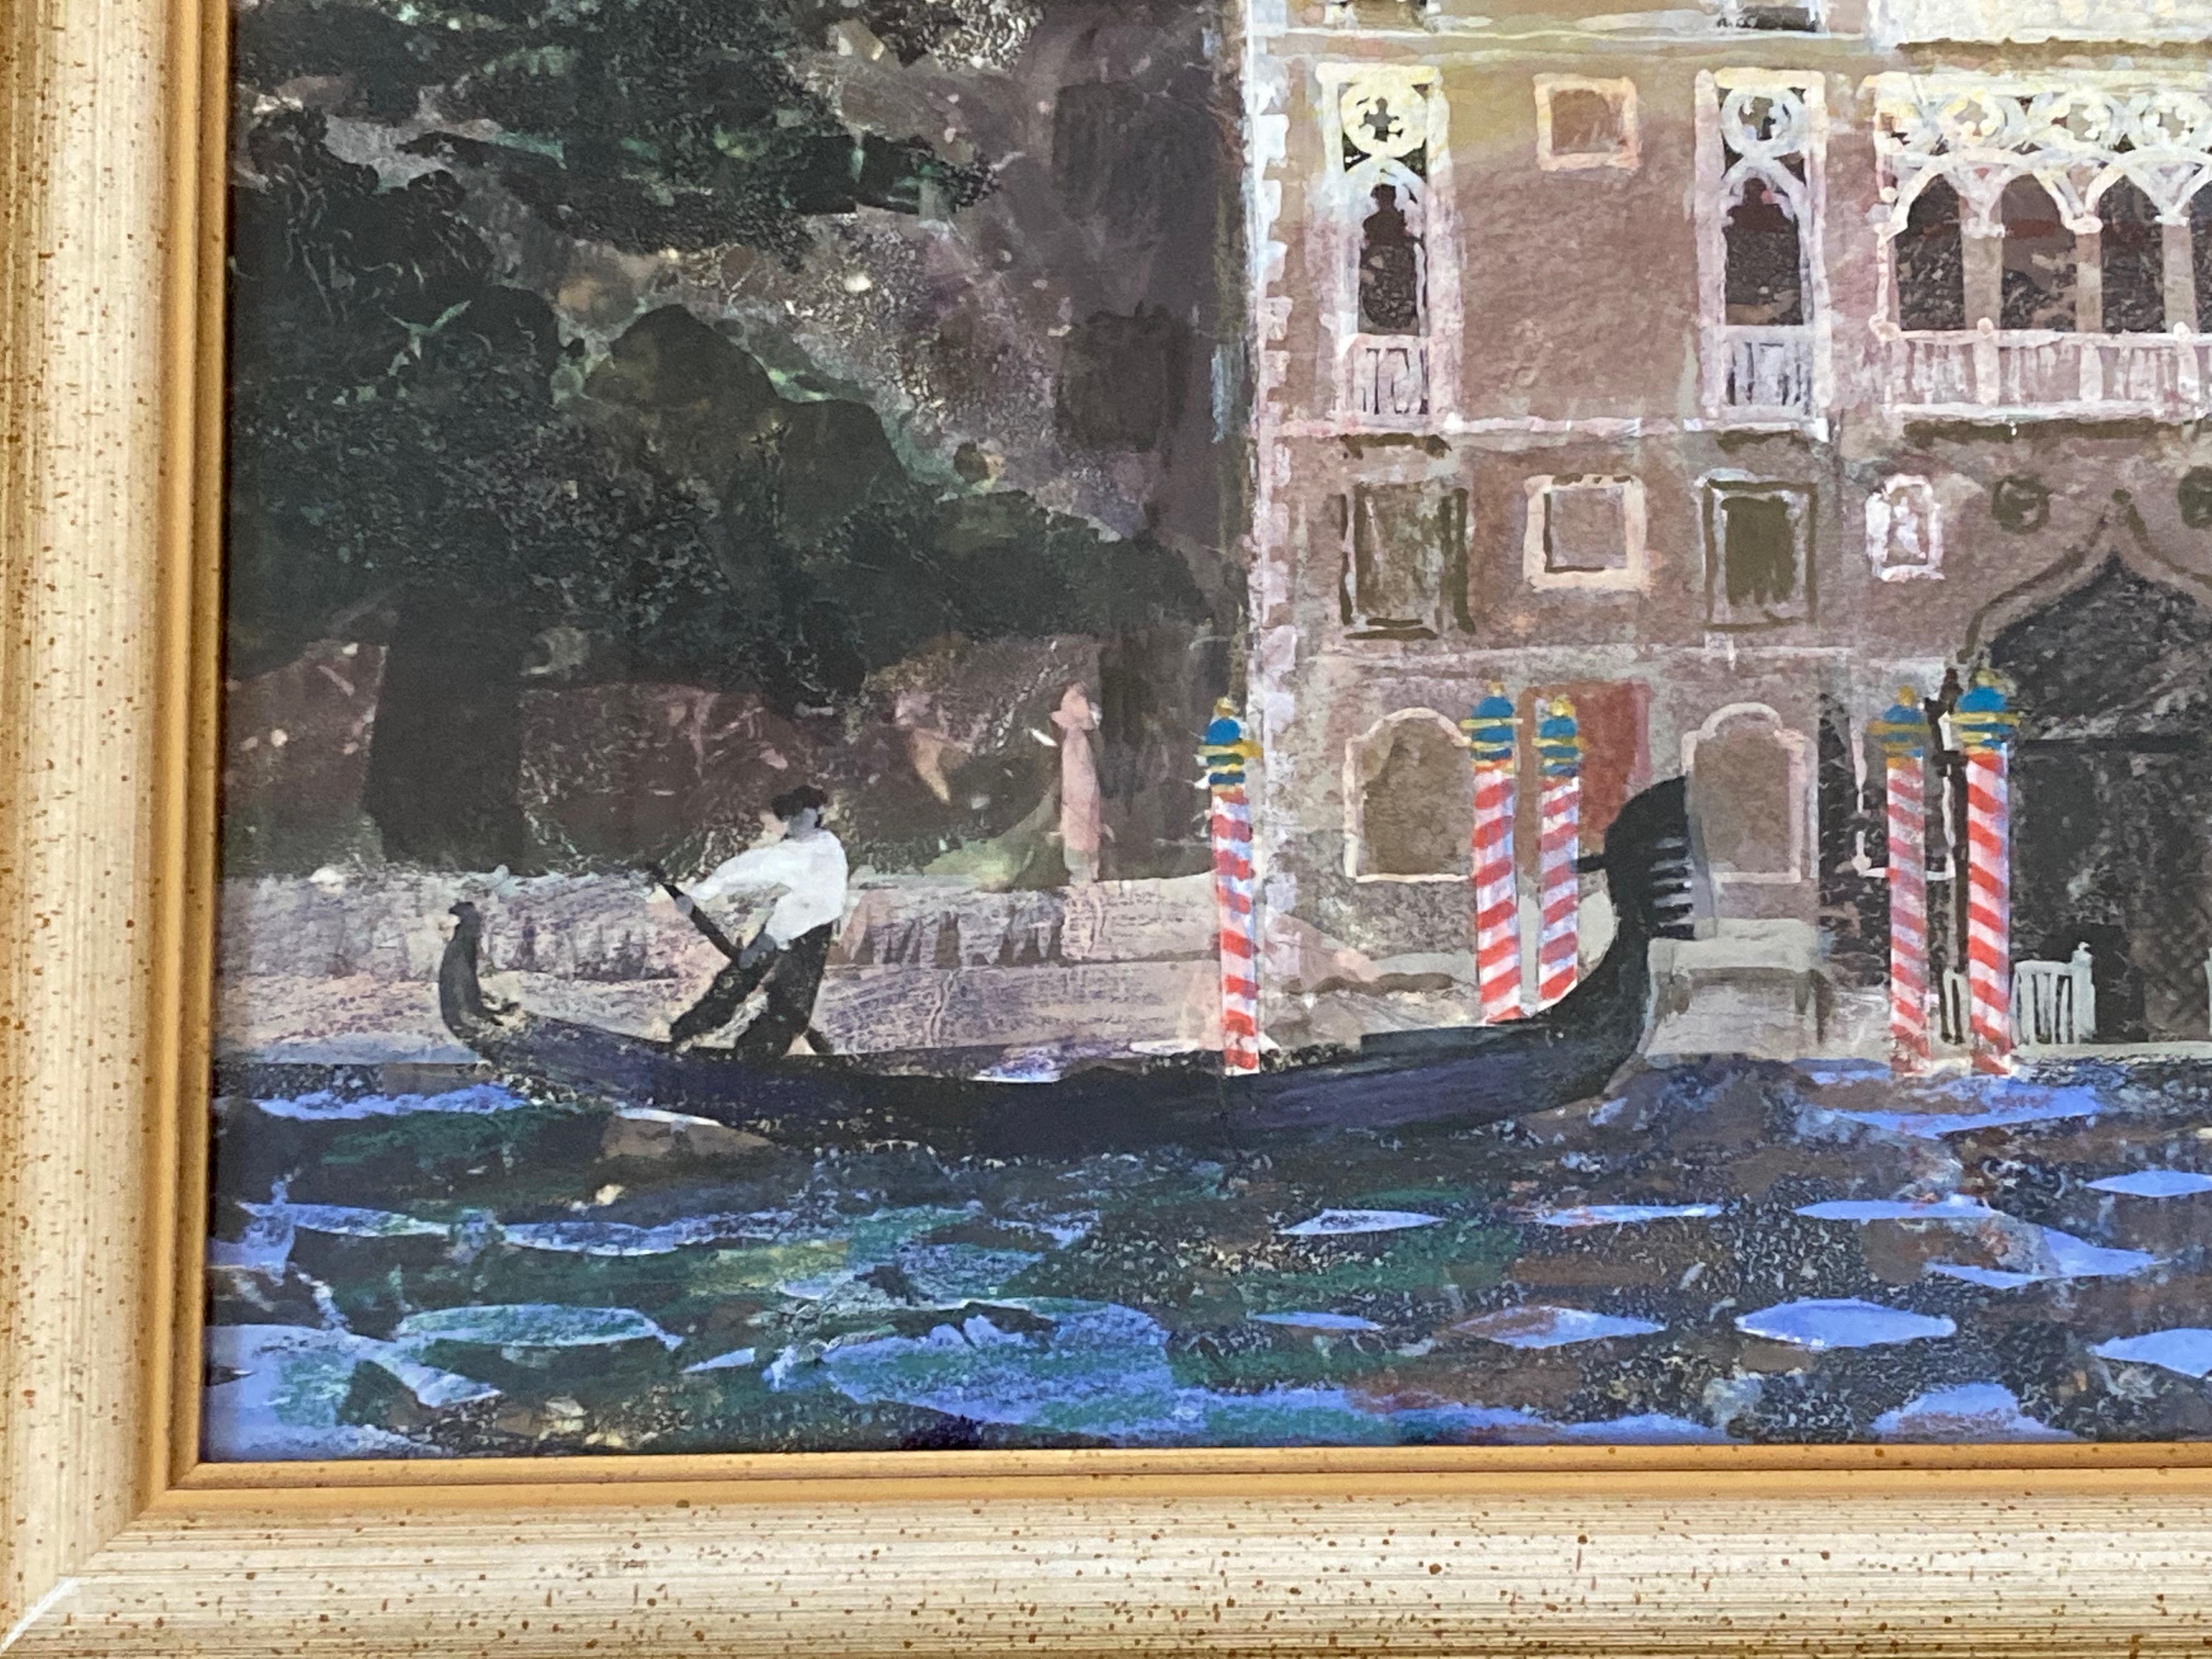 Glyn Morgan (1926 - 2015)
The Cavalli Franchetti Palace, Venice
Signed and dated (19)99
Watercolour, gouache and collage
12 x 17 inches 
16 x 21 including the frame

Glyn Morgan studied firstly at Cardiff School of Art 1942-1944 under Ceri Richards.